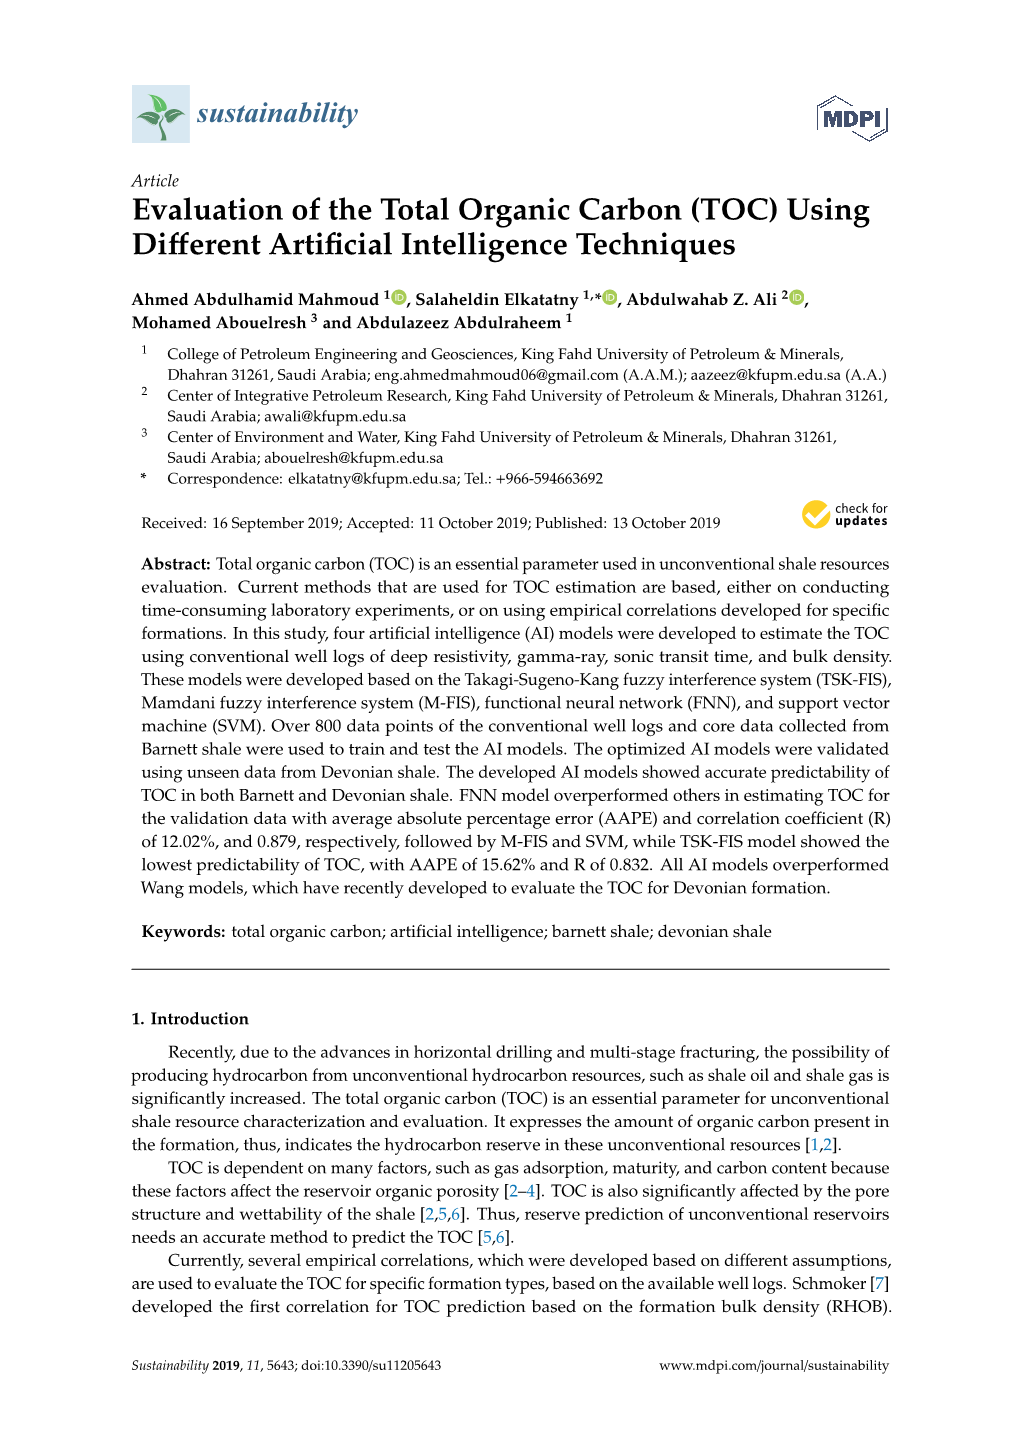 Evaluation of the Total Organic Carbon (TOC) Using Diﬀerent Artiﬁcial Intelligence Techniques